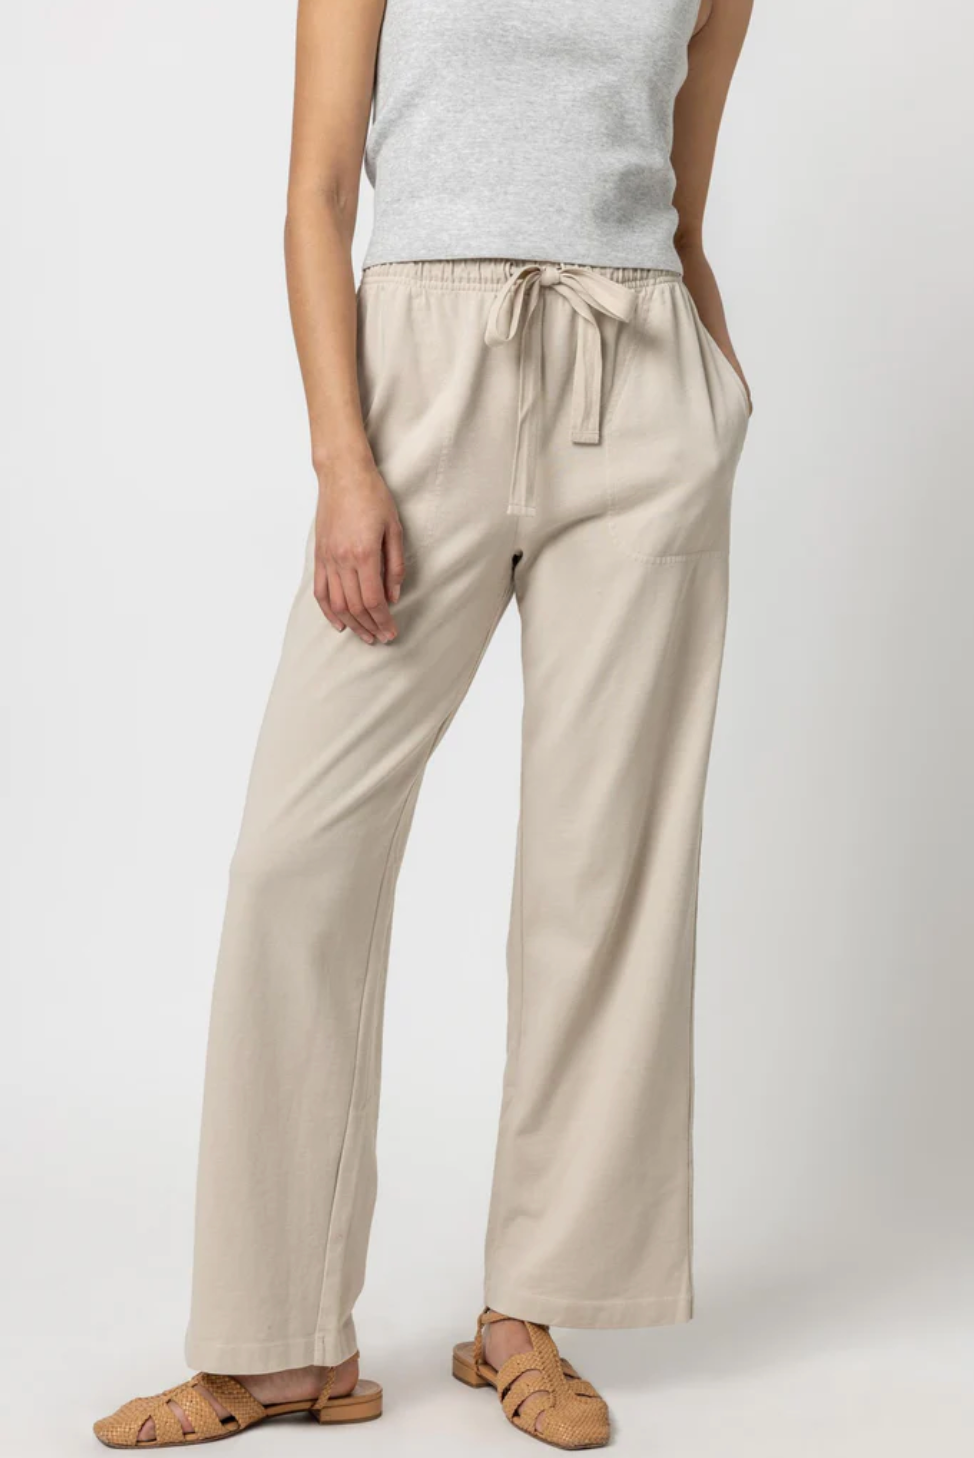 Drawstring Pant in Pebble - The French Shoppe